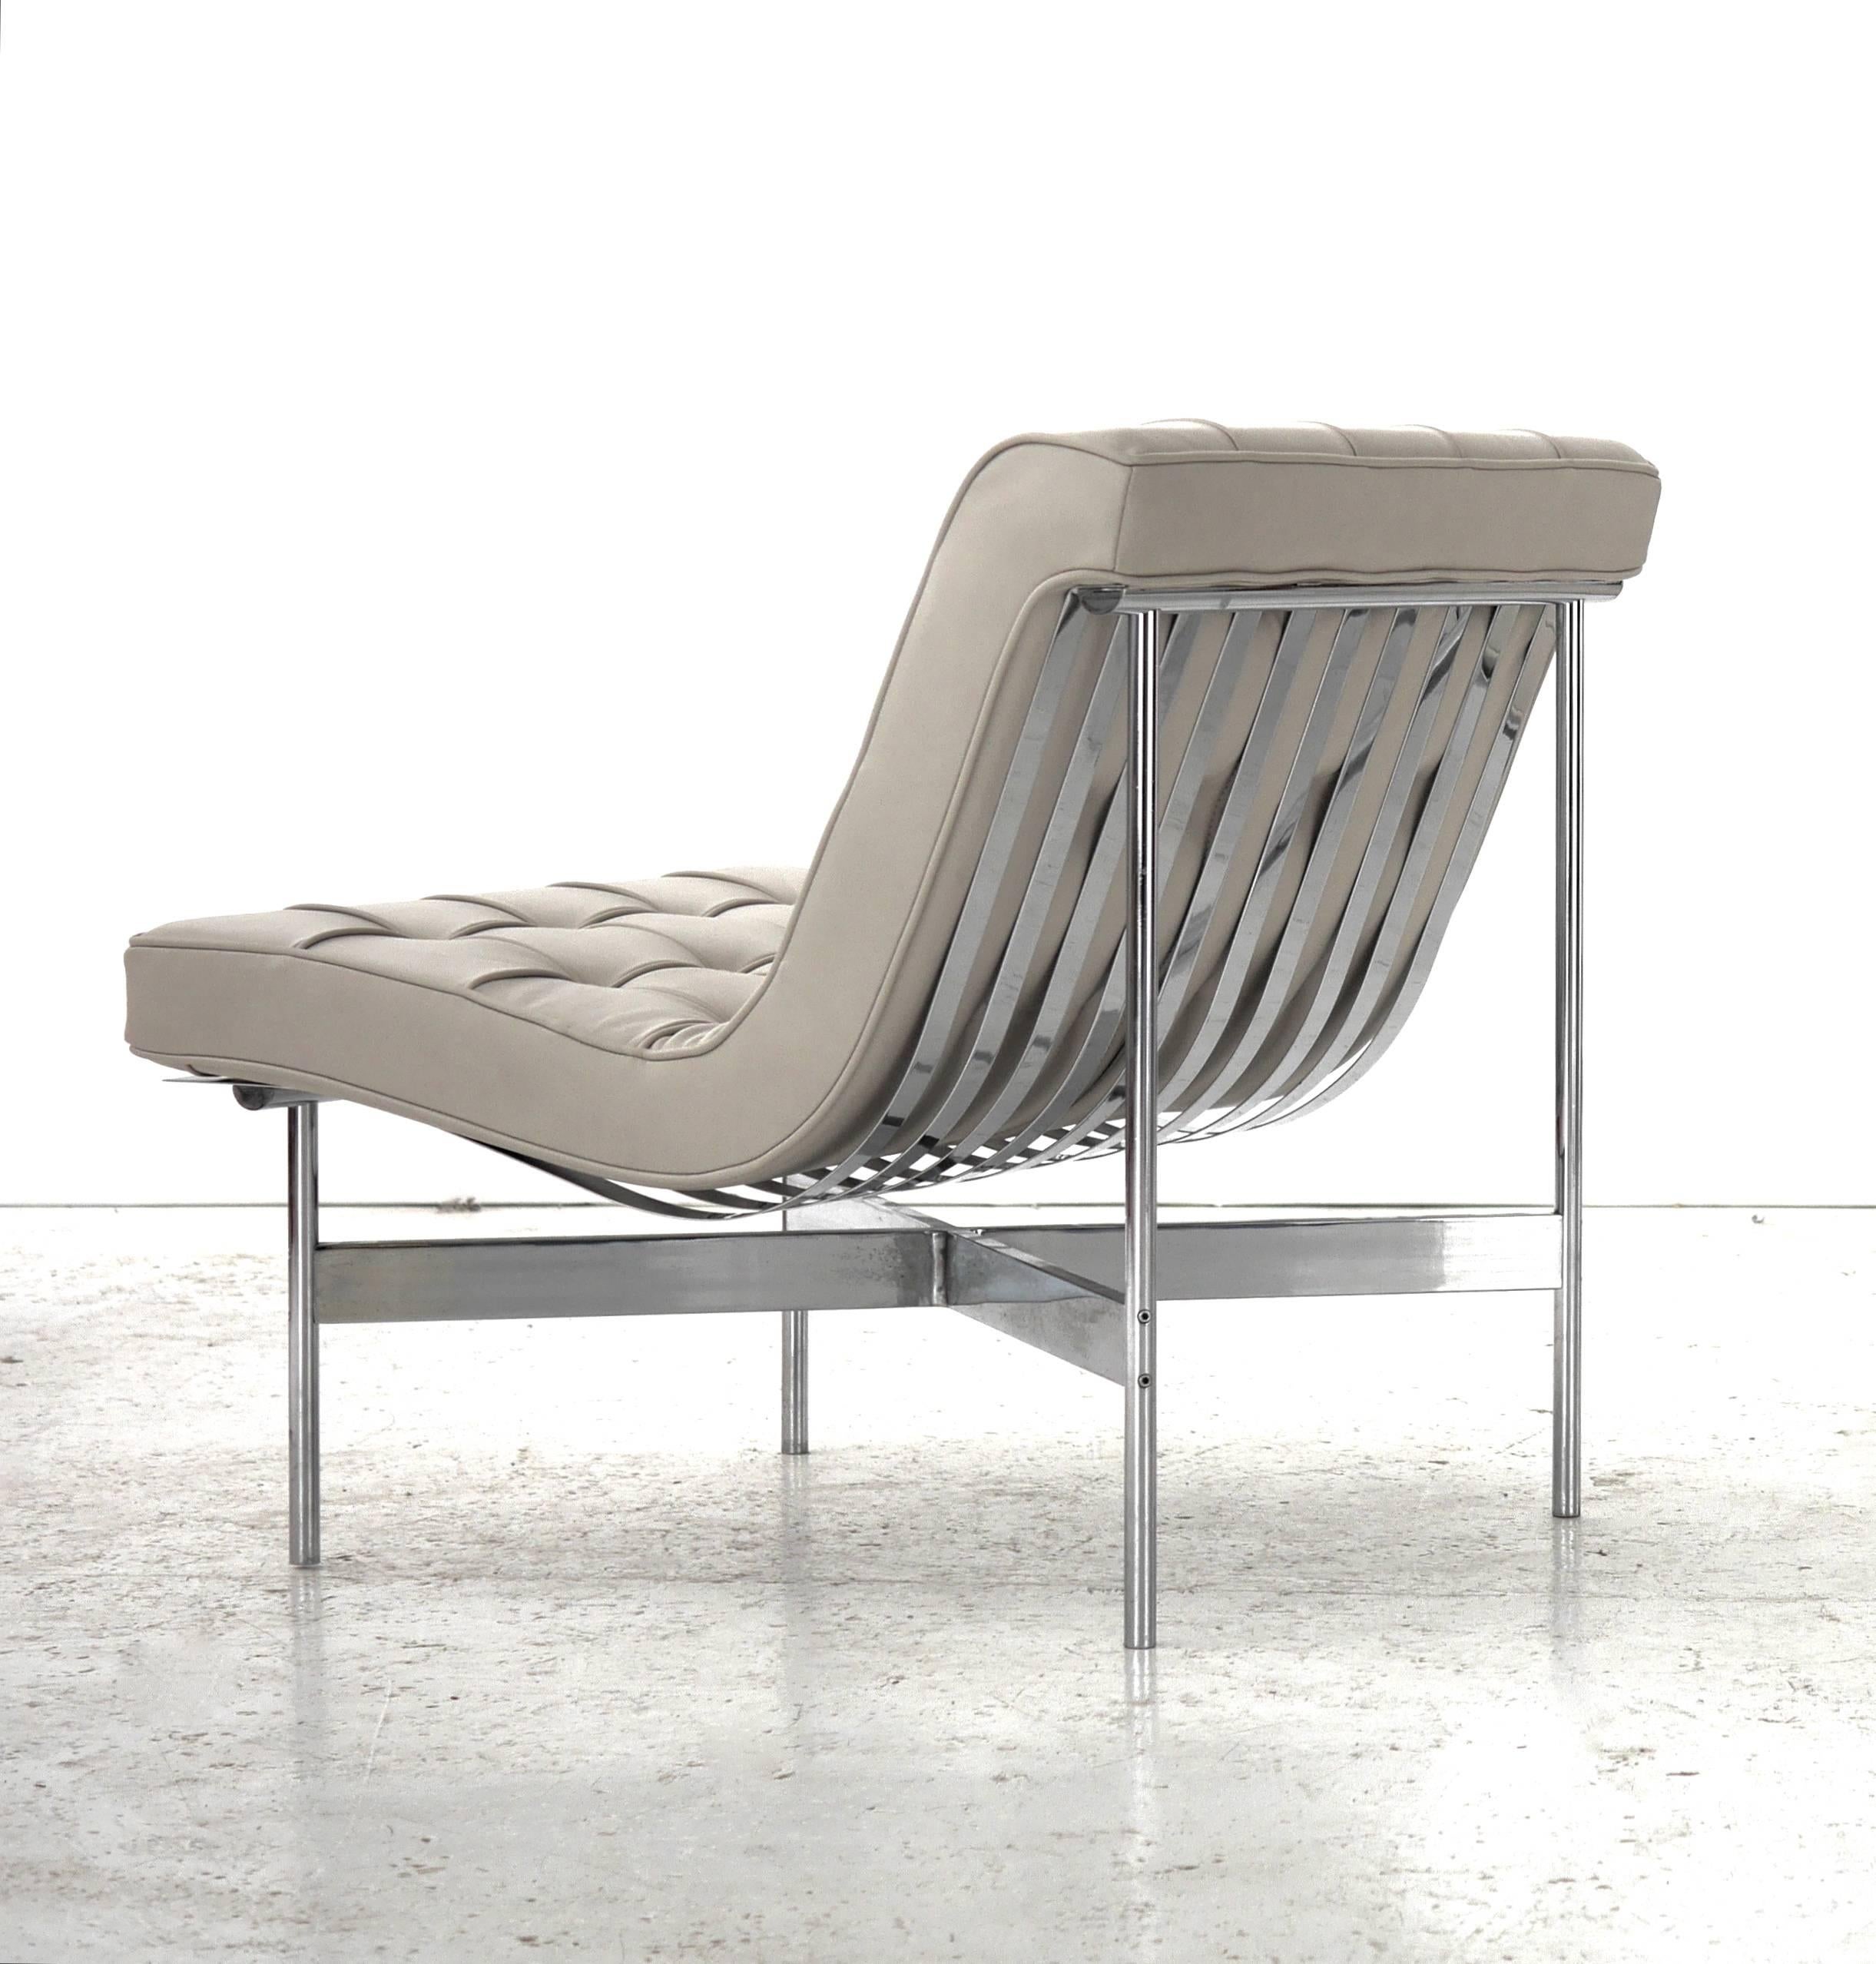 William Katavolos, Ross Littell and Douglas Kelley for Laverne model 5C lounge chair, 1953.
Recently reupholstered on a pale grey leather. Minor pitting on the chrome X braces.